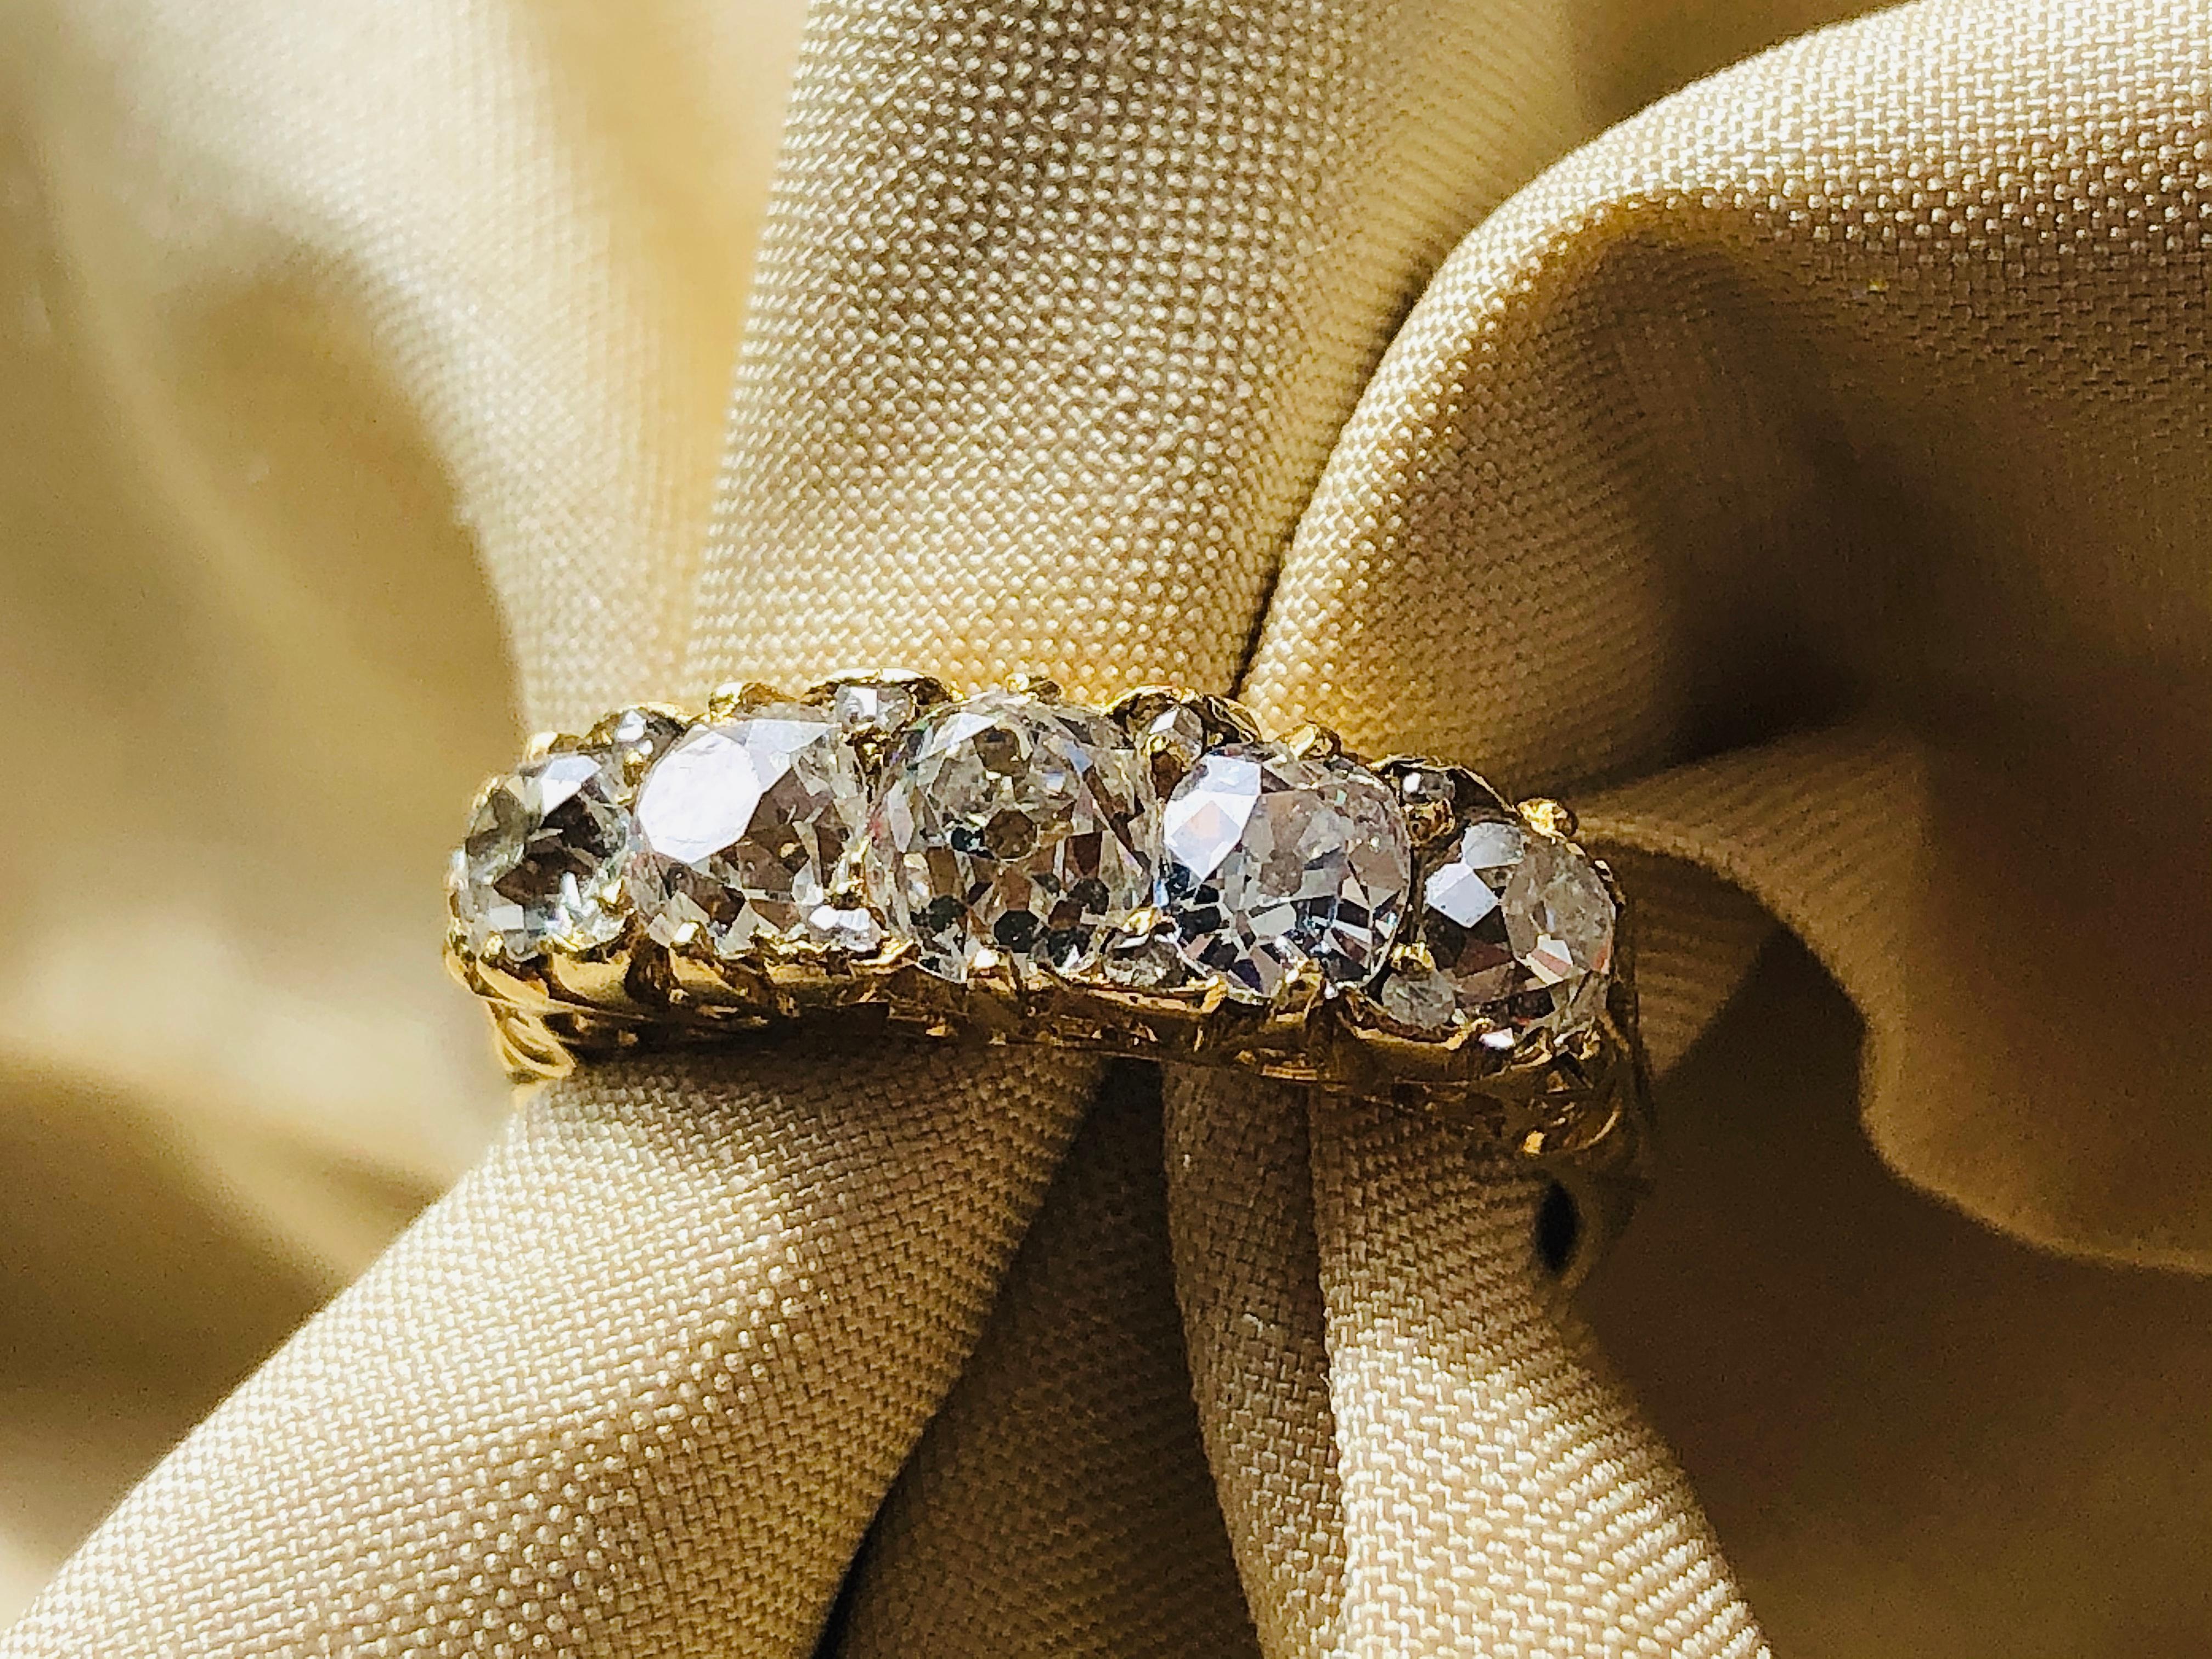 Victorian, diamond five stone ring, circa 1880. Set with five beautiful chunky old mine-cut diamonds (1.60ct total) in an intricately carved yellow gold setting. This style of ring is called a carved half hoop. The diamonds in this ring are